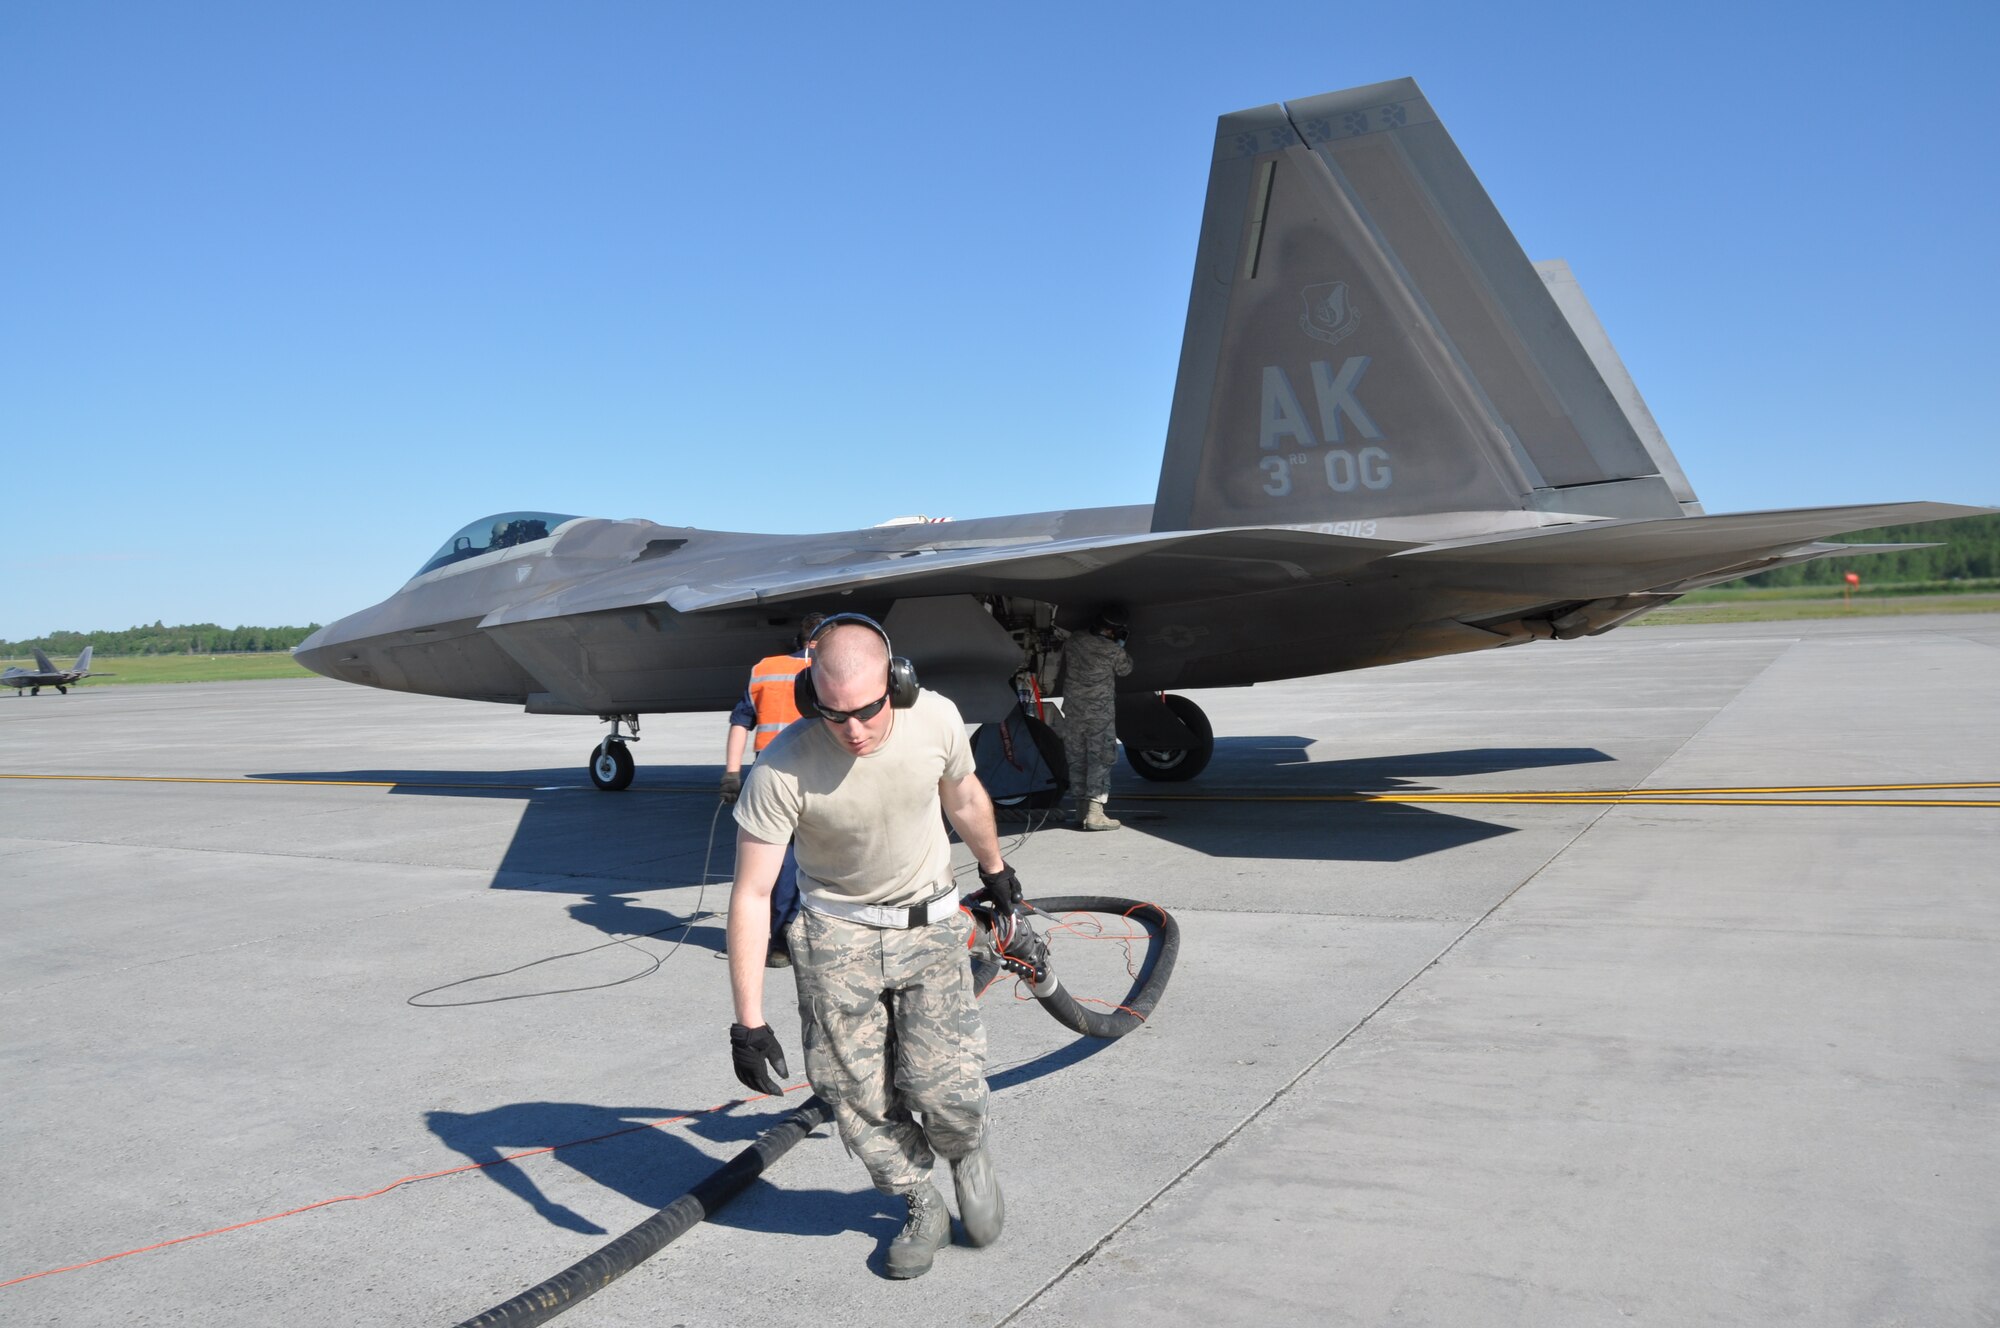 Senior Airman Steven Isaacson, 673rd Logistics Readiness Squadron fuels operator, along with Airmen from the 3rd Aircraft Maintenance Squadron perform a hot pit refuel with an F-22 here. Hot pit refueling is a procedure performed in order to rapidly refuel the aircraft and allow it to complete a second sortie in a short amount of time. During a hot pit refuel the pilot will stay in the cockpit with the jet running while the maintenance crews perform safety checks and refuel the aircraft allowing it to return to flight in minimum. (U.S. Air Force/Capt. Ashley Conner) 